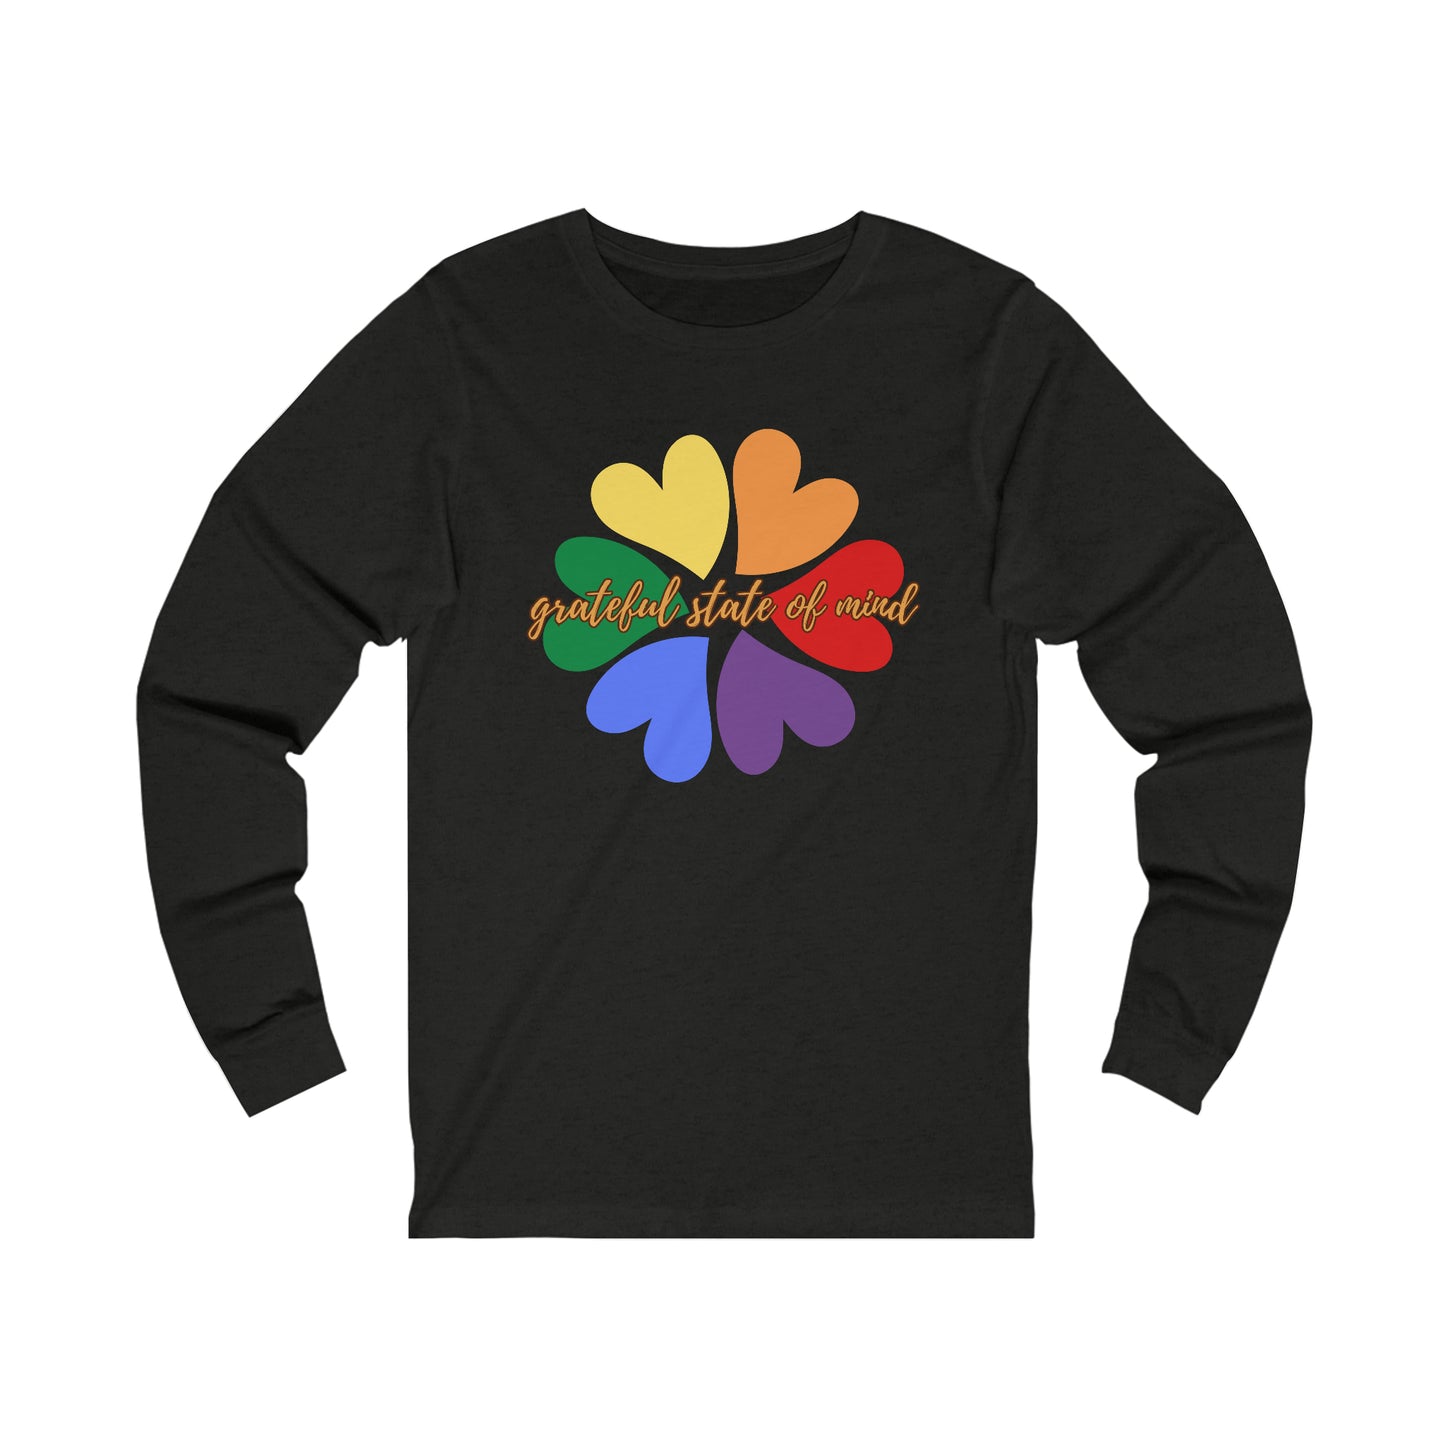 Colorful hearts under this “grateful state of mind" Unisex Jersey Long Sleeve Tee.